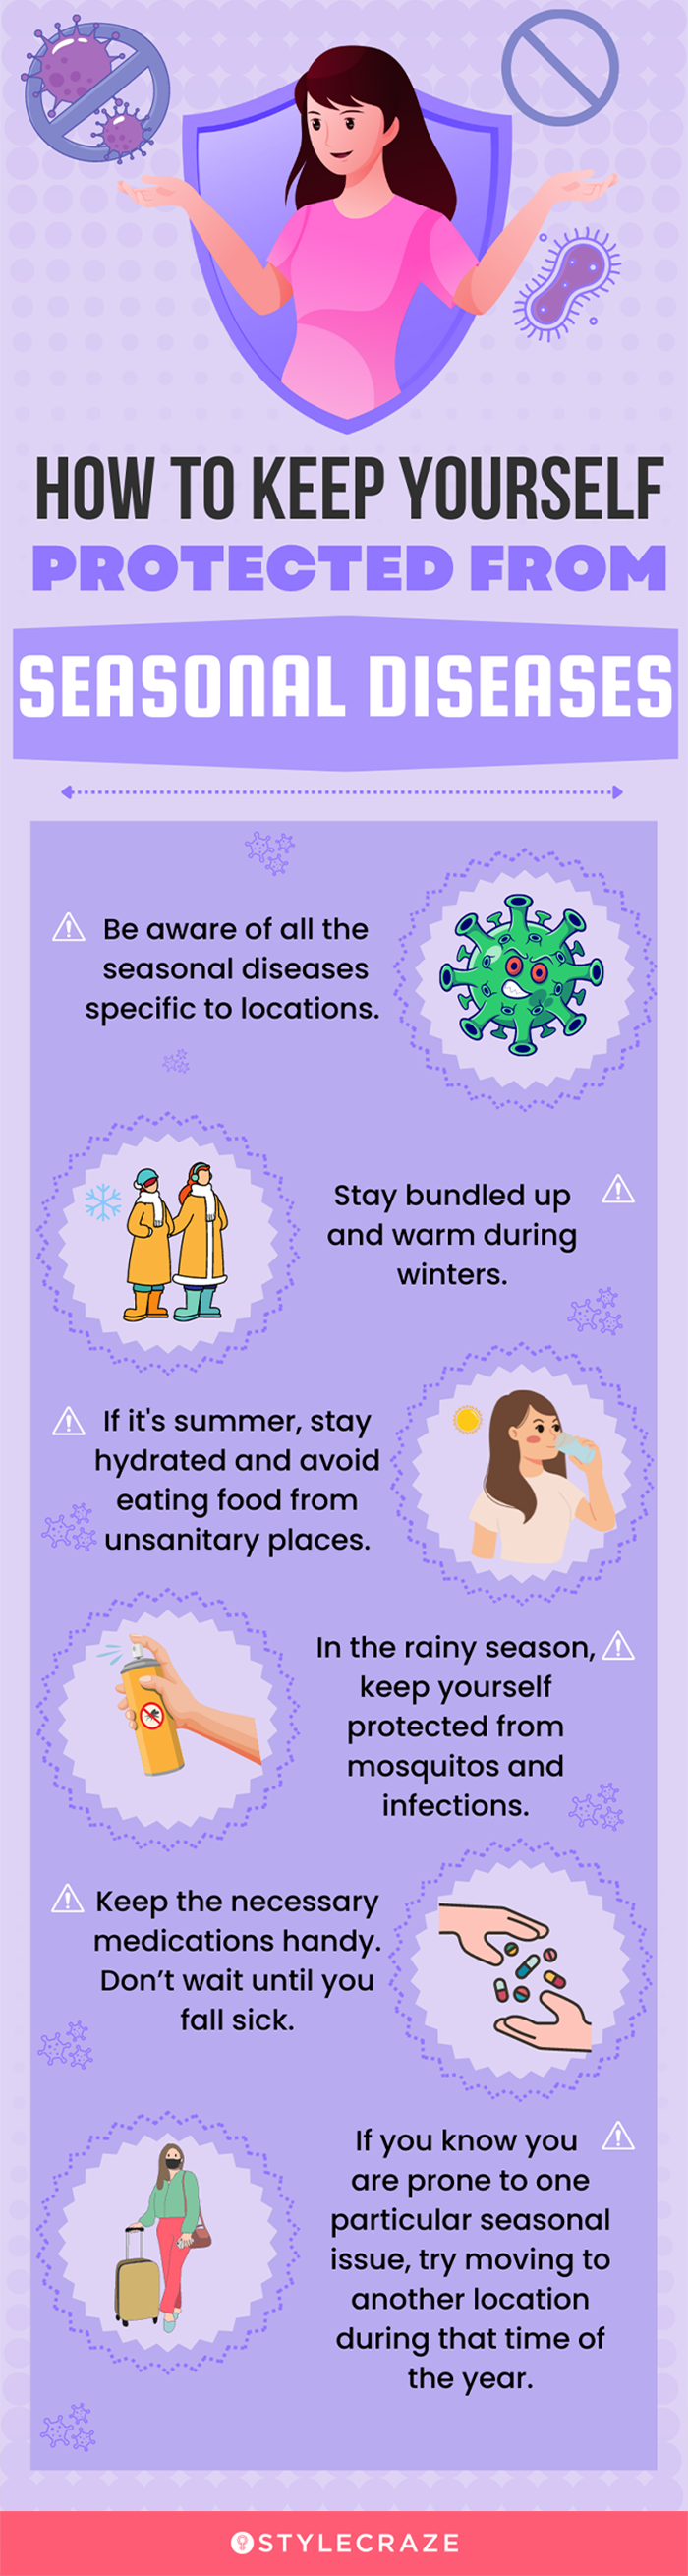 how to protect seson disease [infographic]